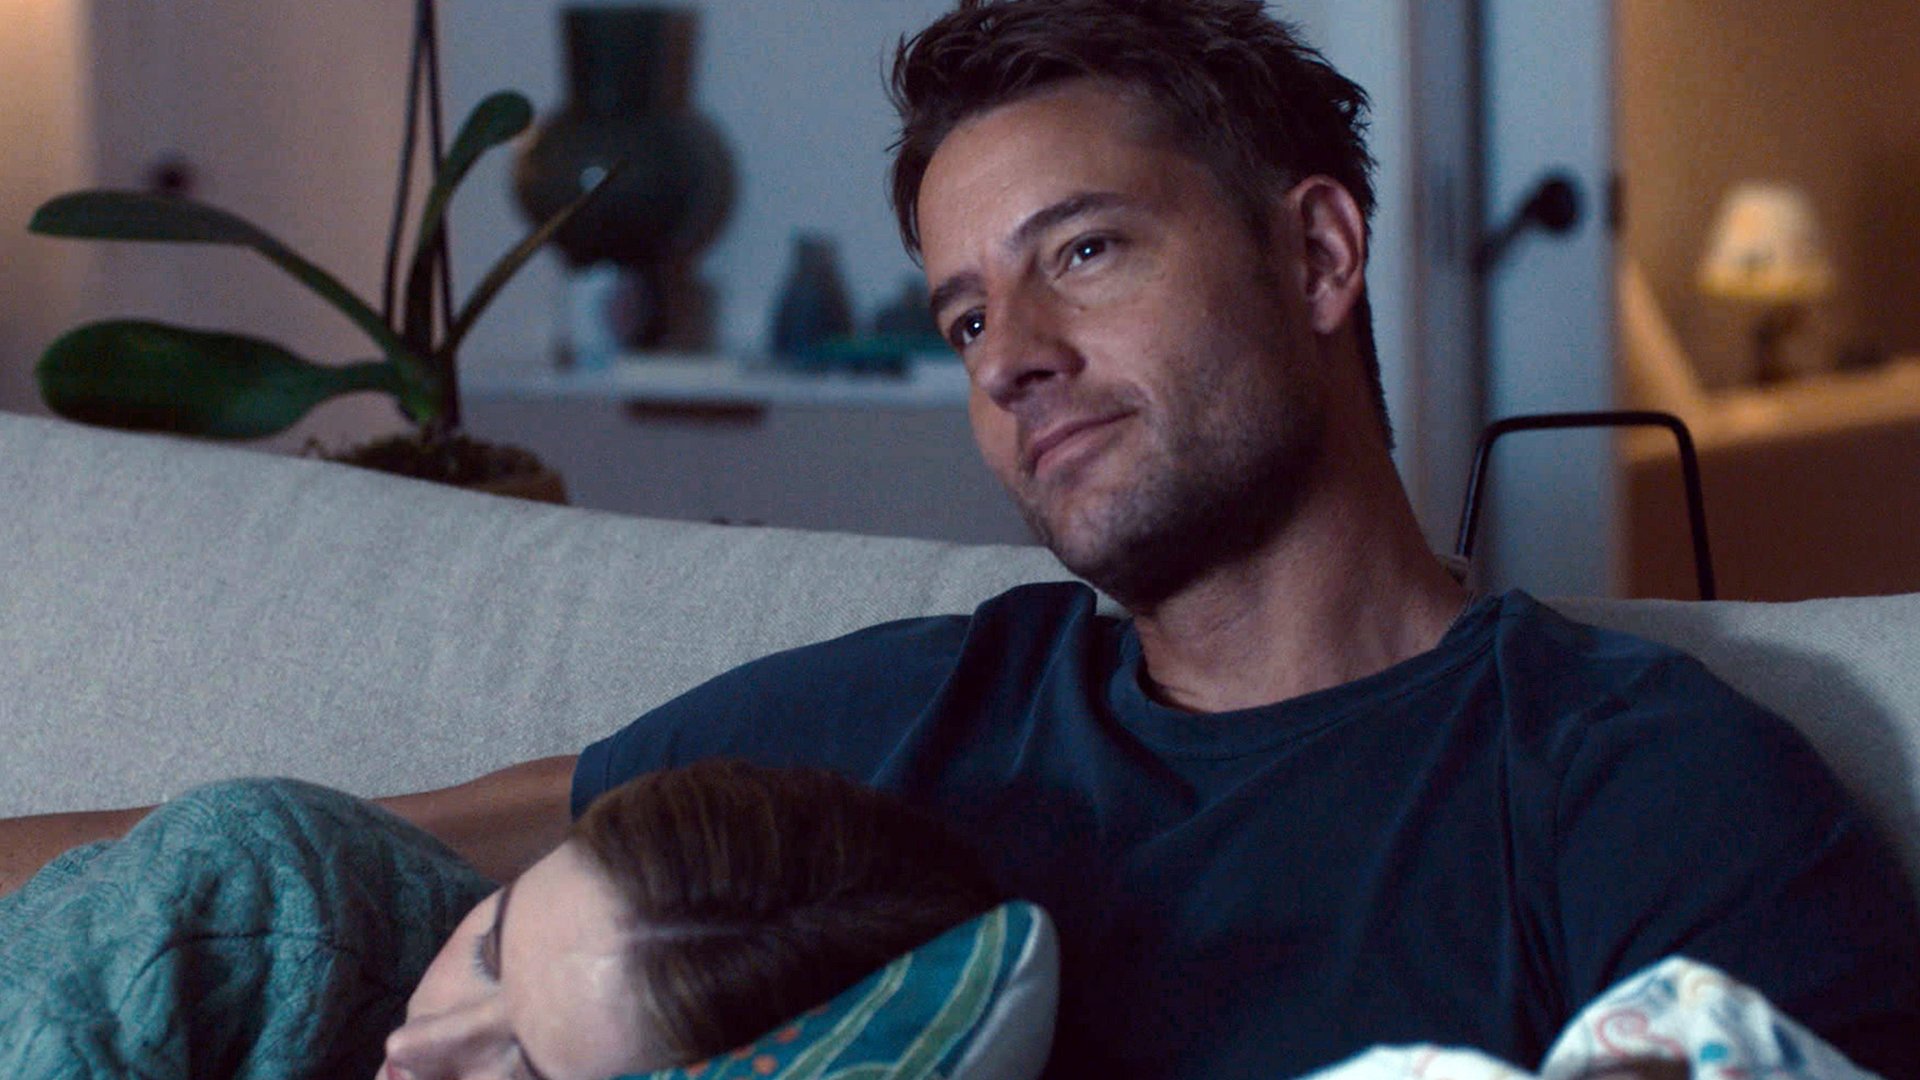 Caitlin Thompson as Madison Simmons sleeping on Justin Hartley as Kevin Pearson in ‘This Is Us’ Season 5 Episode 14